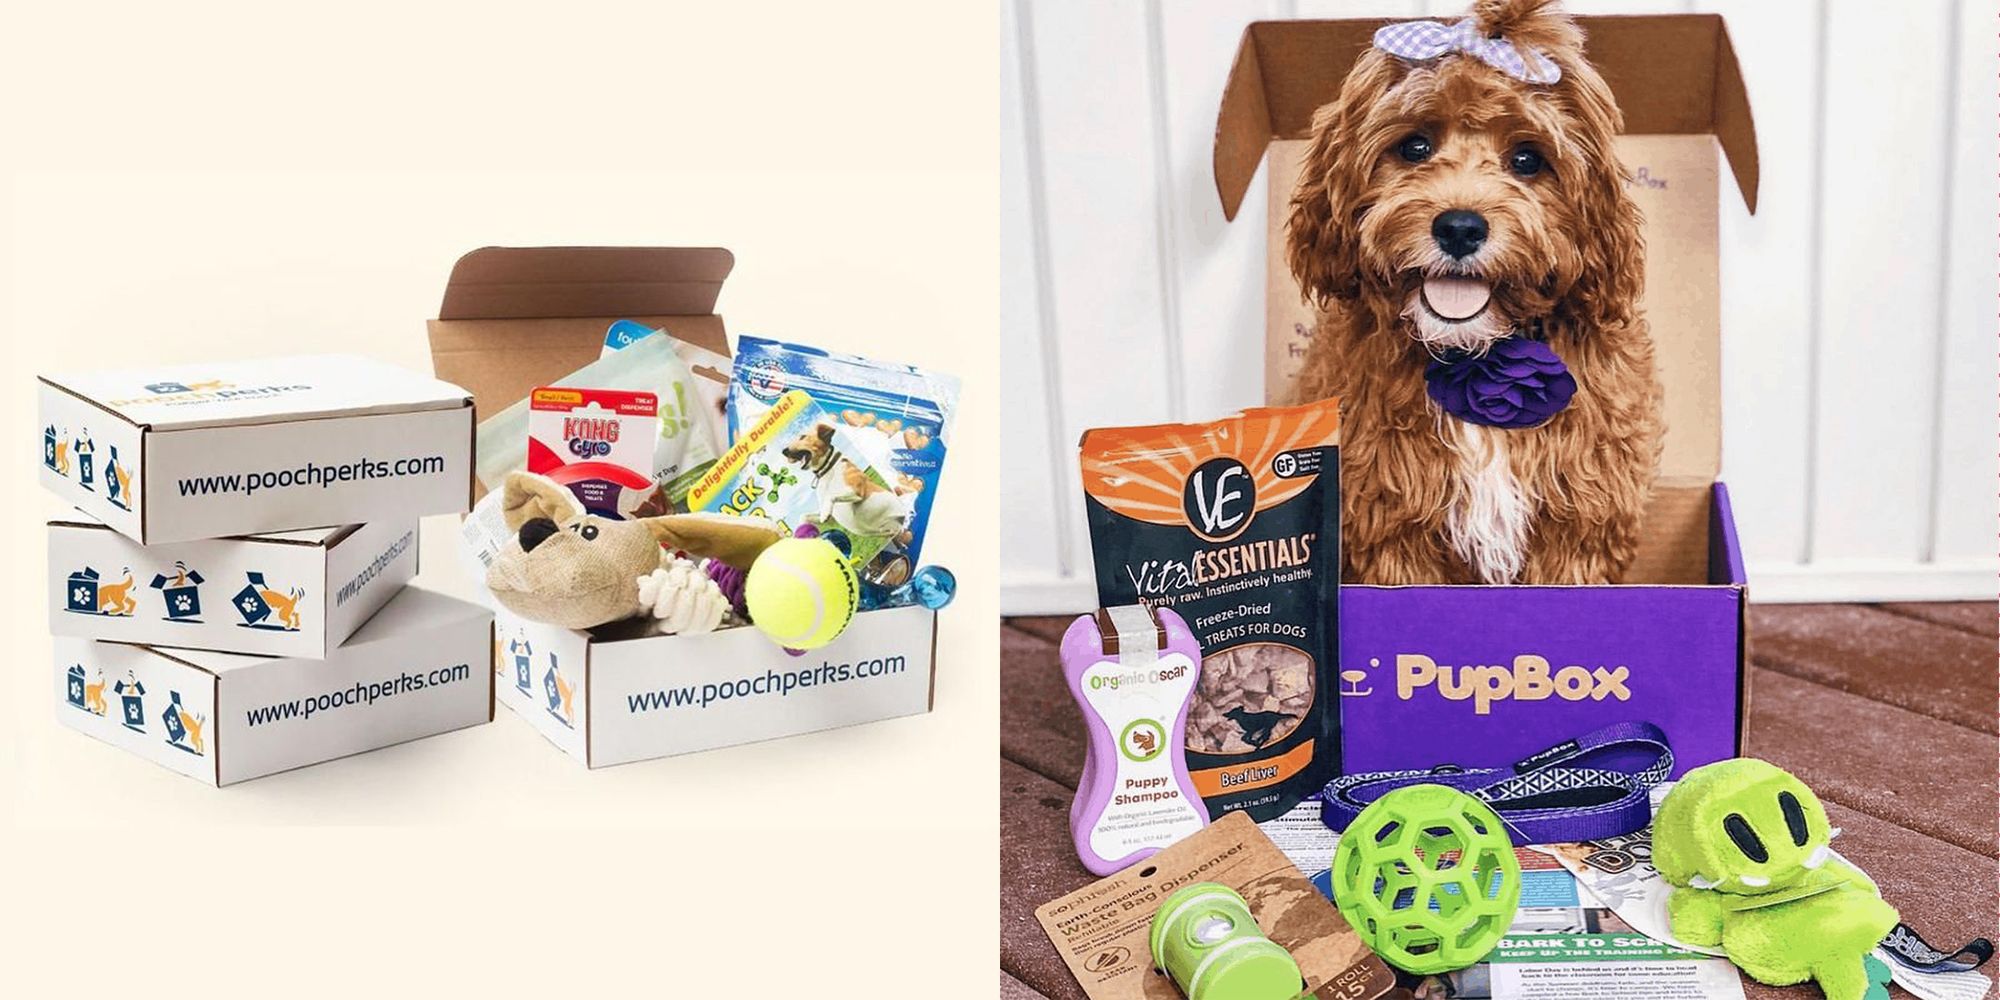 Dog moms and fur babies monthly box - Cratejoy